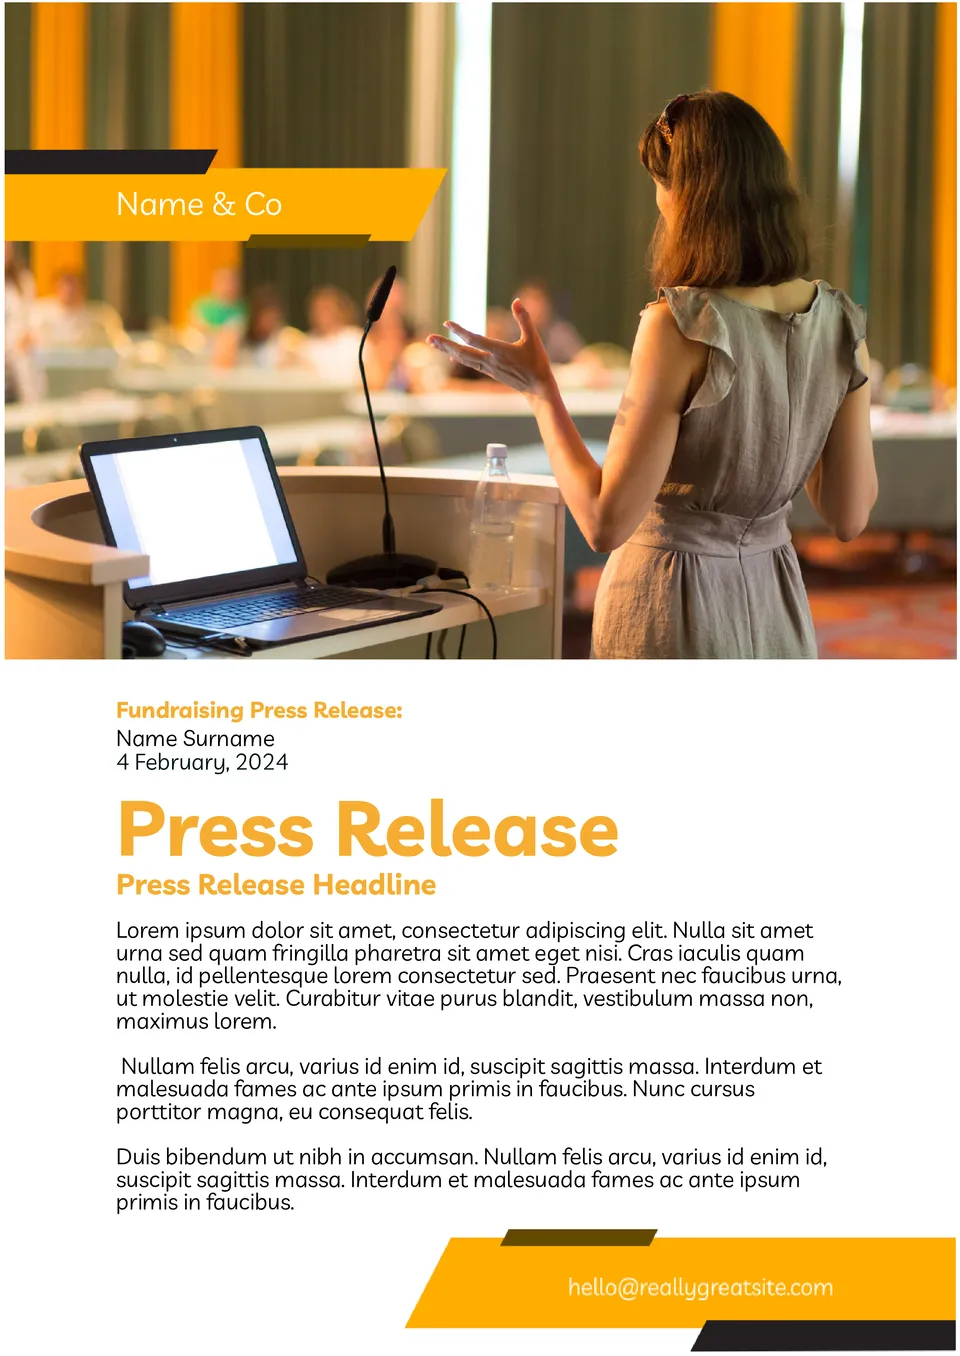 Fundraising Press Release Template